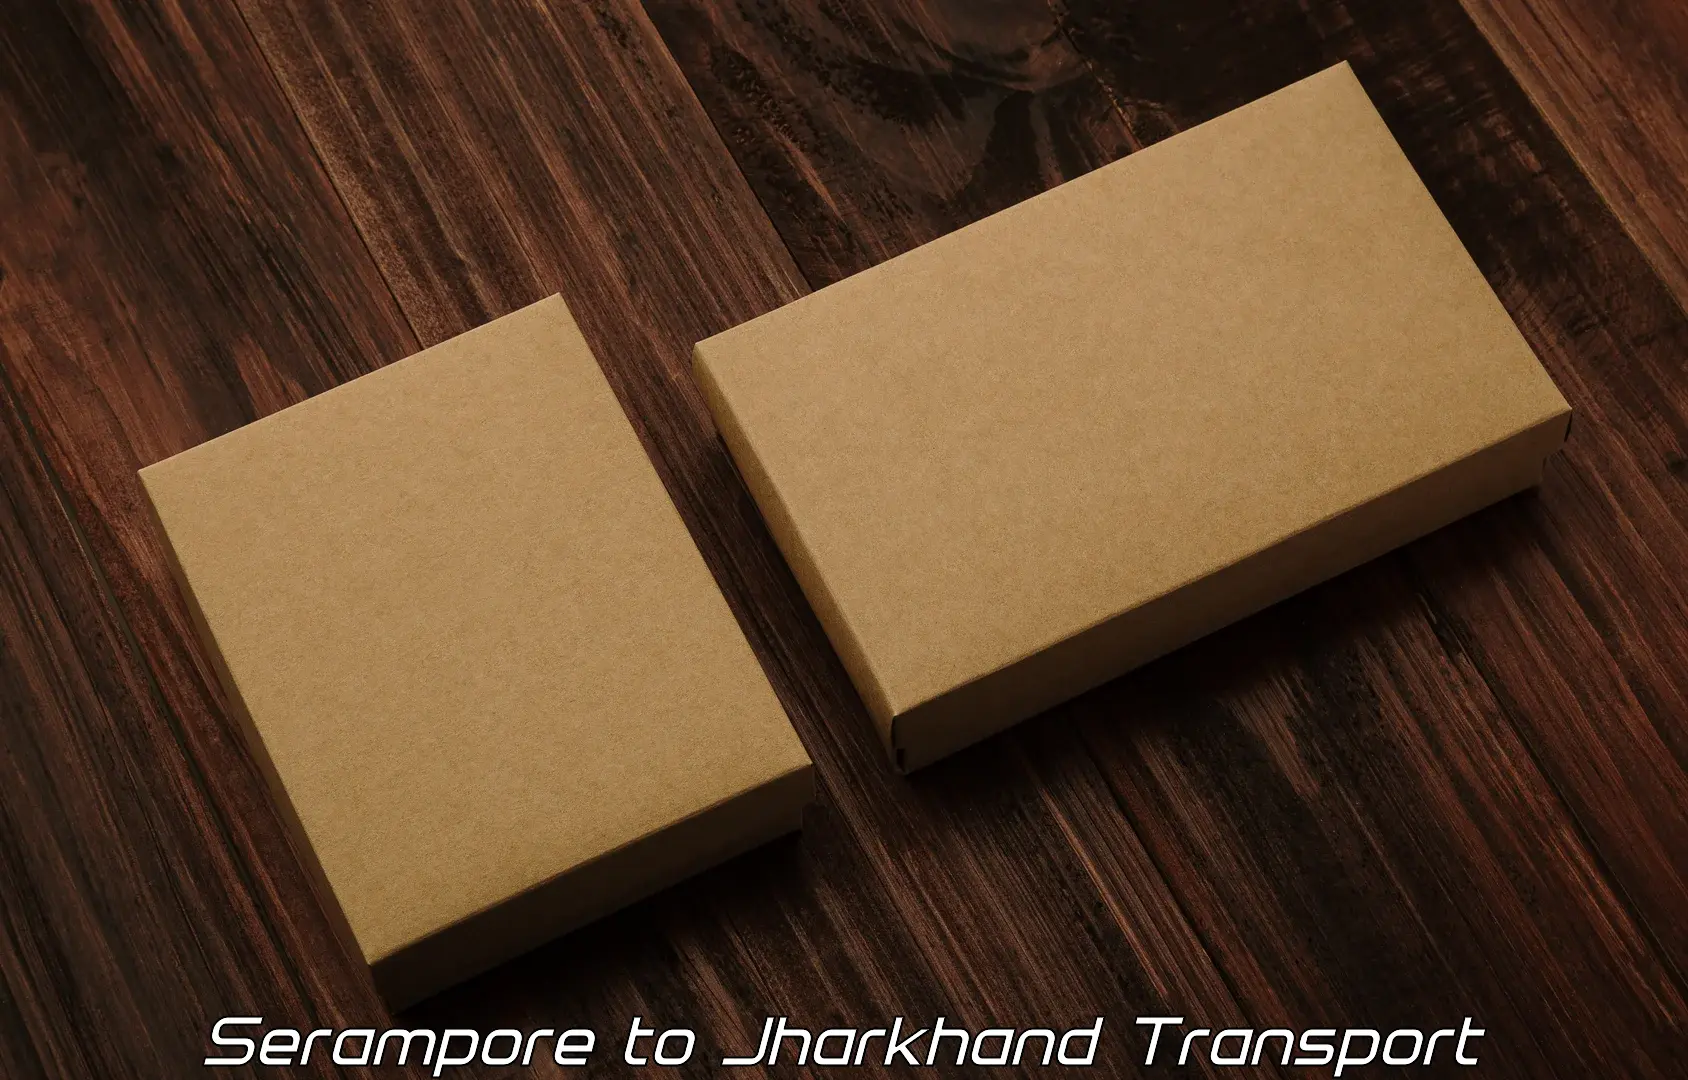 Vehicle parcel service Serampore to Jharkhand